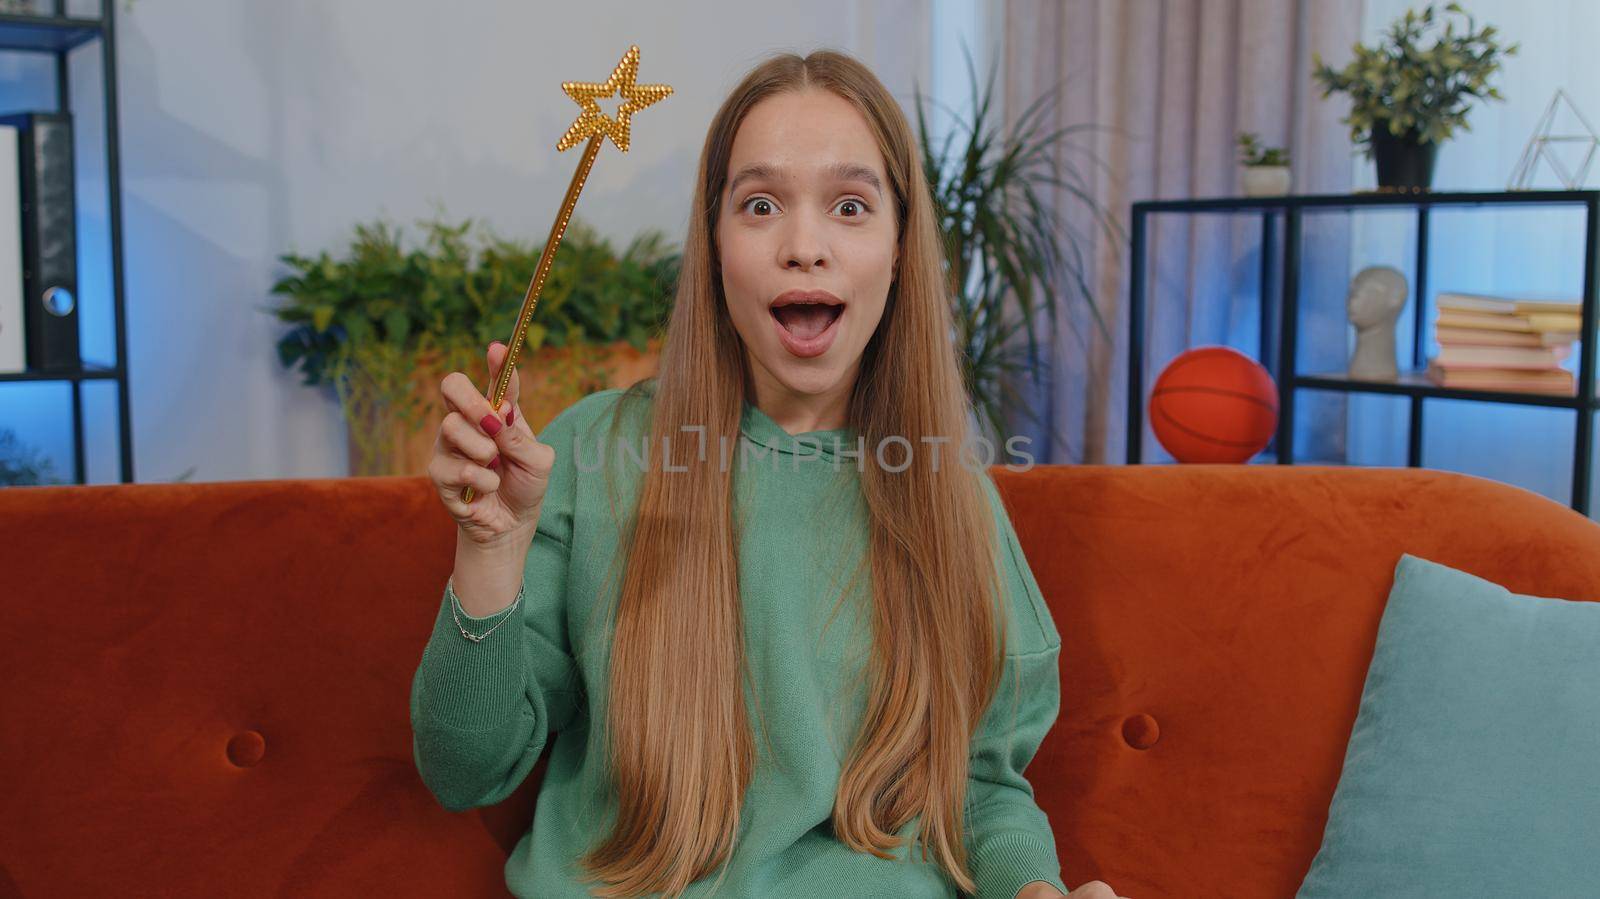 Magician wizard child girl gesturing with magic wand making wish come true, casting magician spell by efuror